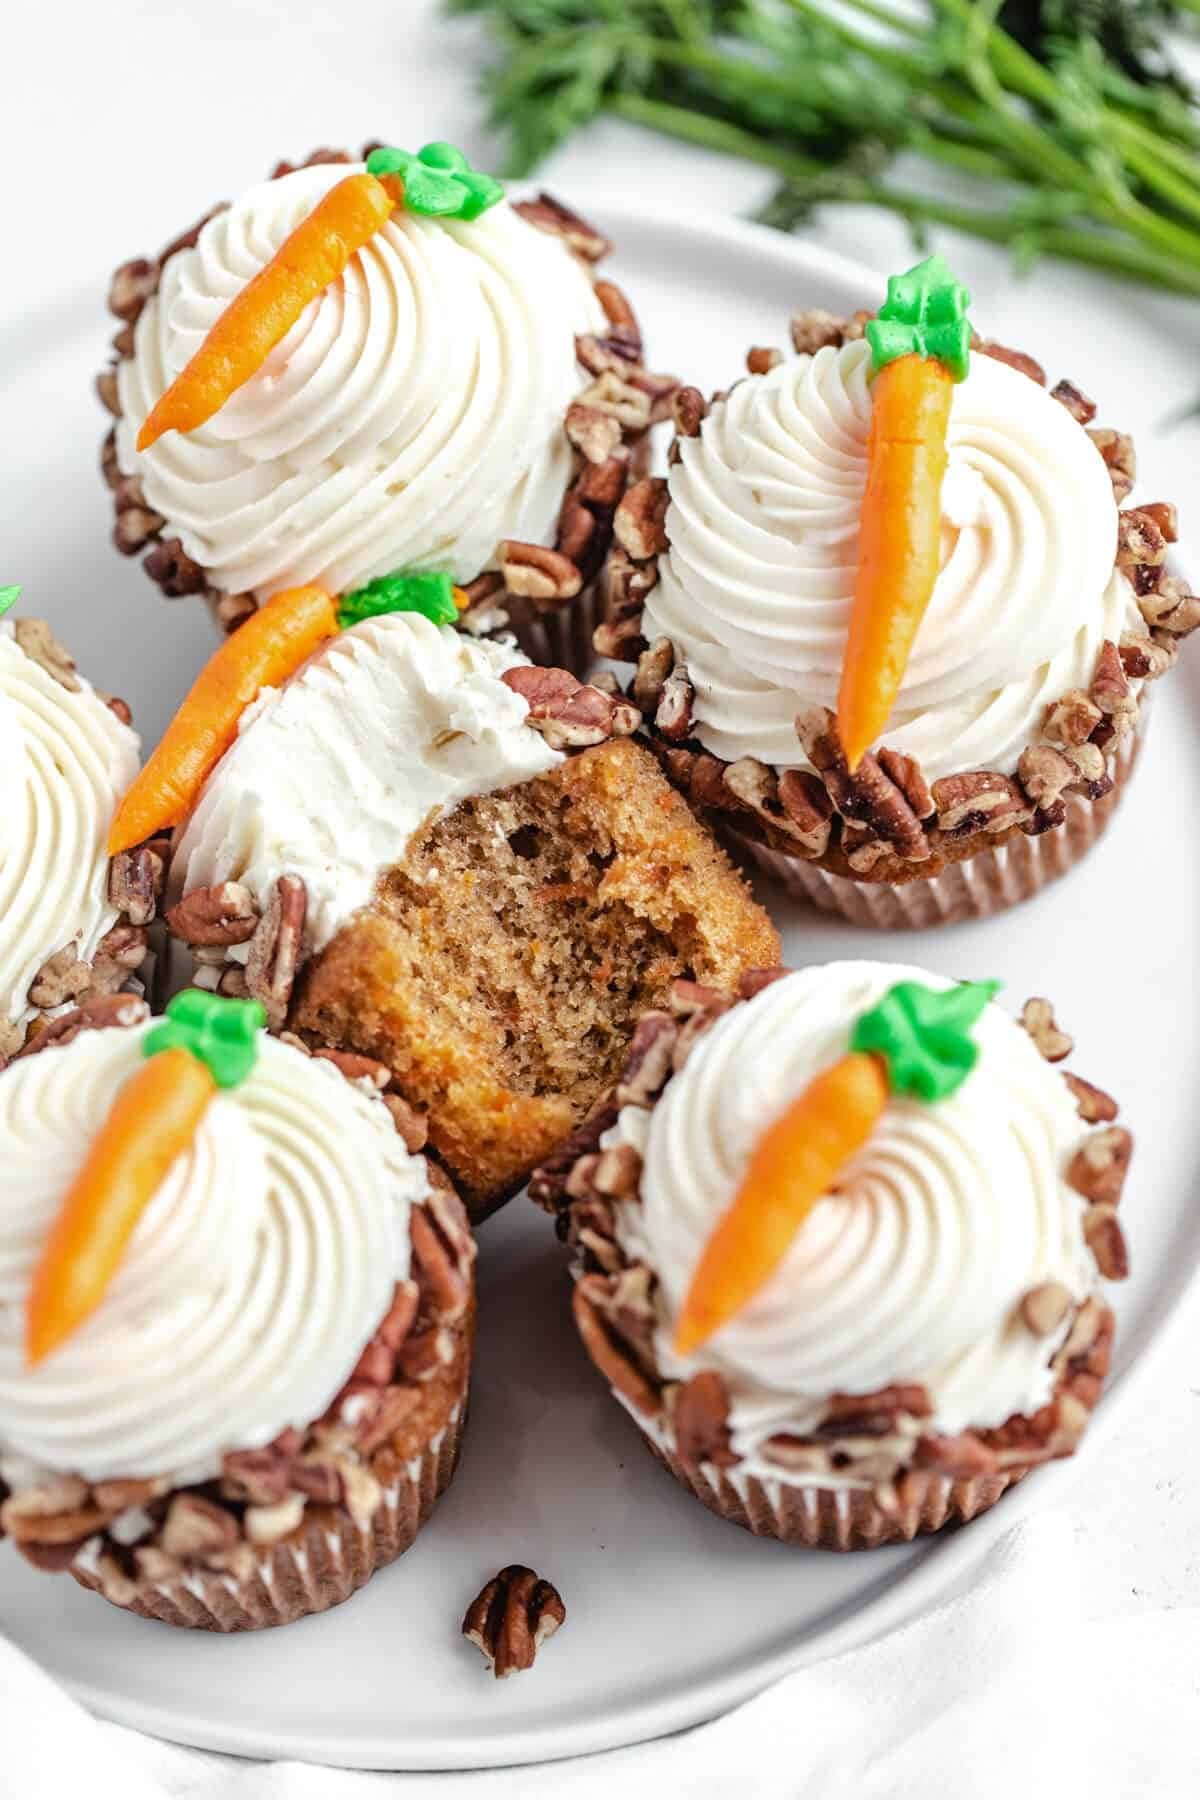 Bunch of carrot cupcake and cream cheese frosting with candy carrot garnish on top.